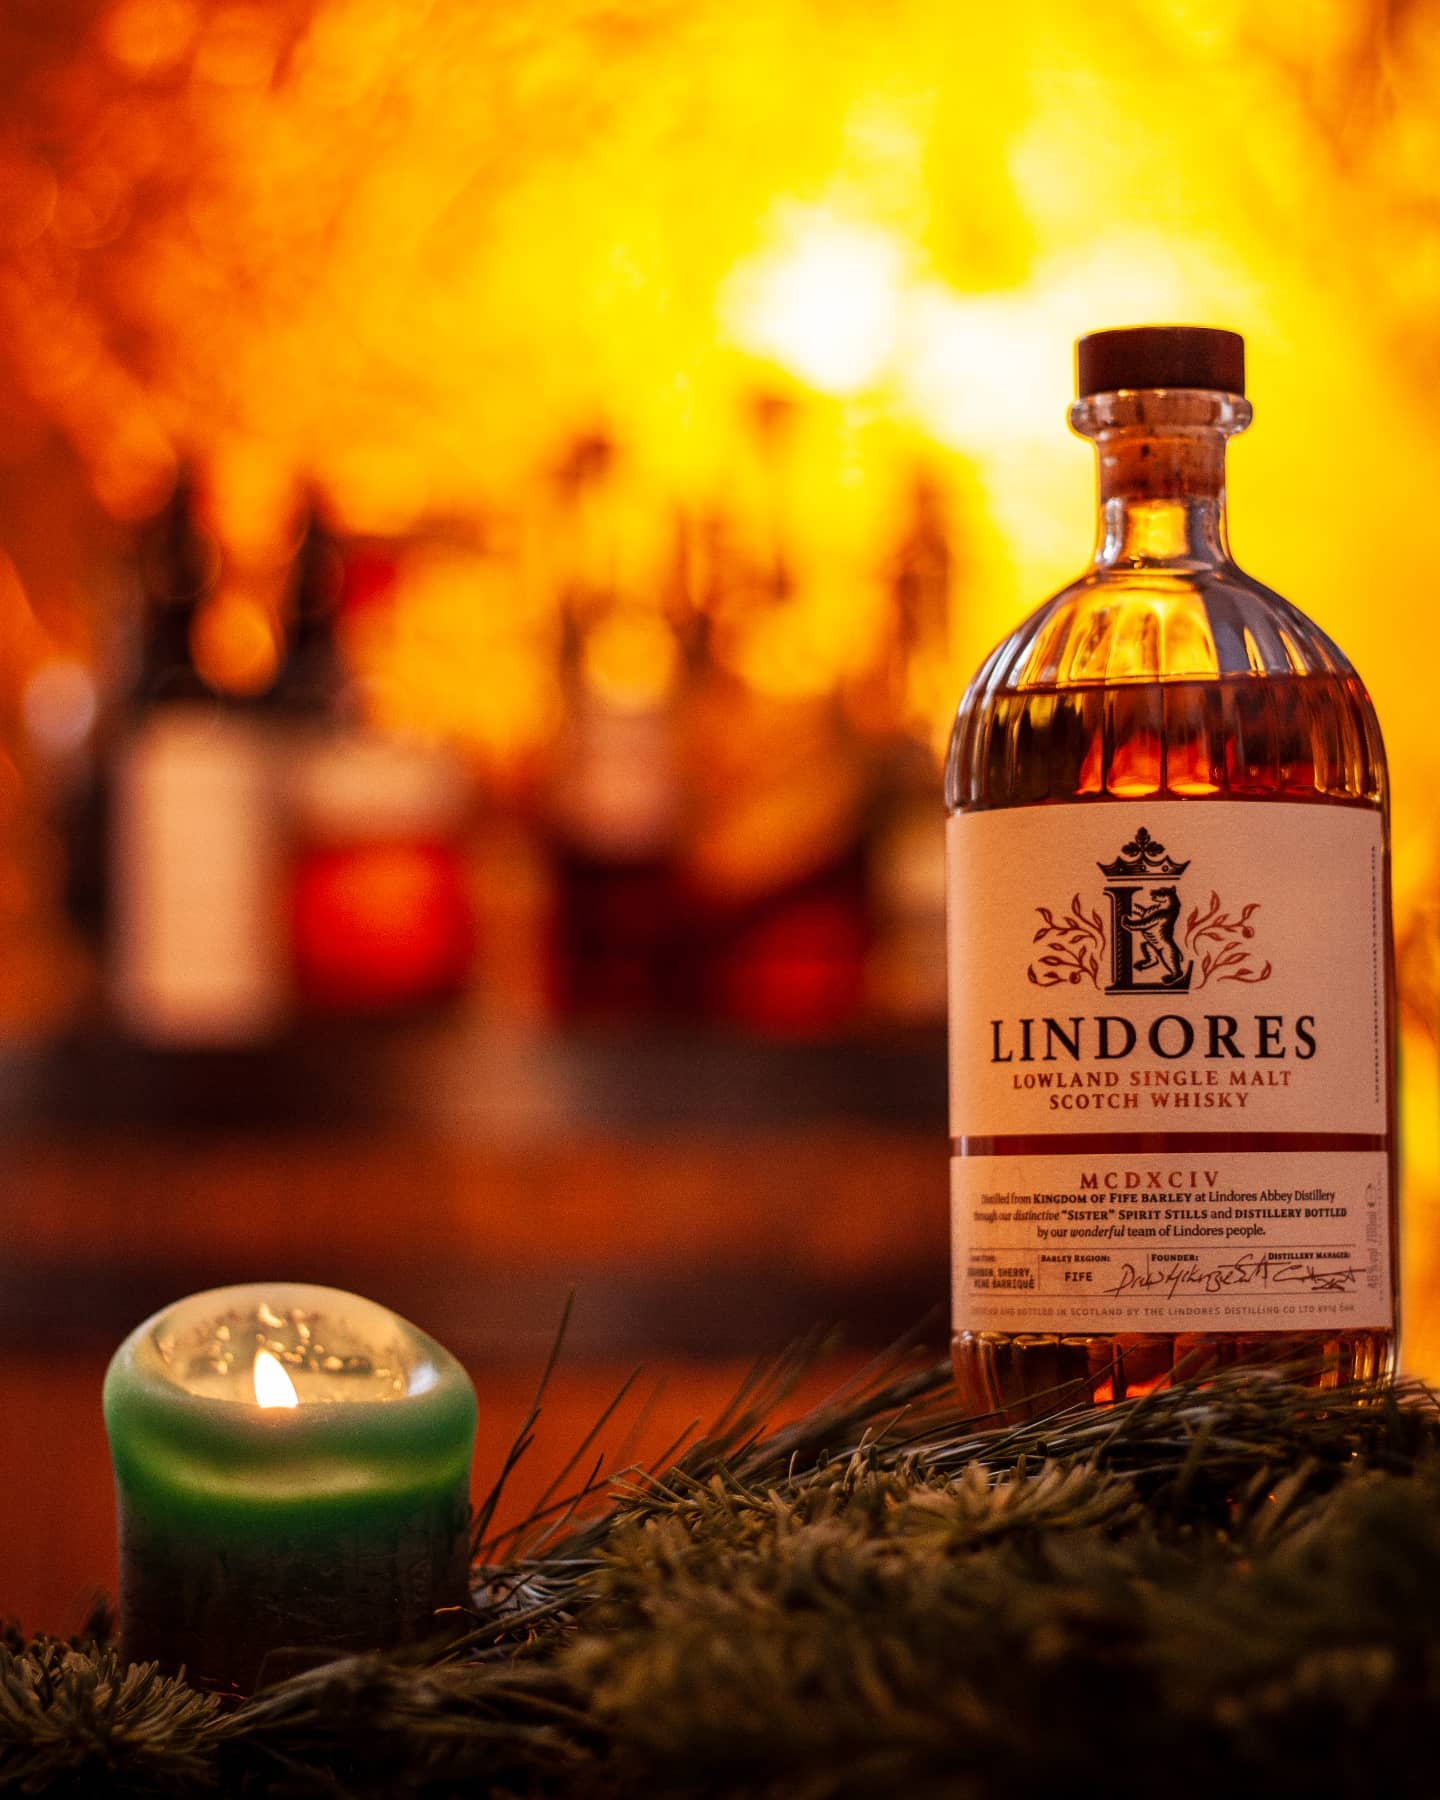 #mcwulf advent calendar 2021 - window no.23

[unpaid ad]

Window no. 23 finally offers a promising young lowland whisky, the @lindoresabbeydistillery MCDXCIV Single Malt (46% ABV) and the very first release of the cradle of Scotch whisky ("...eight bolls of malt..." - remember?😉)!

📜 tasting notes:

👃
Citrusy and fresh, lemon, unripe oranges, with green wood, apple vinegar, orchard fruit and slightly spicy, some yeast.

👅
Orchard fruit, lemon peel, vanilla and malt, green apples, juicy and spicy, hints of oak.

🏁
Orchard fruit, peppery, virgin oak, citrusy, grassy and a light honey sweetness with quite some spiciness of young whiskies.

More info to be found here: www.mcwulf.de (in German).

What a promising start of this young distillery, their wonderfully fruity and tropical sweet new make is a solid starting point for some great maturation... I can assure you there's wonderful drams waiting in Bourbon, STR and sherry casks (after being invited to an online tasting by @prineusgmbh ; thx again!).

Do you fancy Lowlanders? How about young whisky, one of my top passions in whisky: do you feel that whisky needs to be old to be good - or what does a long maturation add if the new make is actually complex already? Share your thoughts and meanwhile enjoy your dramming - cheers!🕯️🥃🎄

#whisky #whiskey #lowlands #scottishwhisky #scotch #slainte #singlemalt #lowlandwhisky #whiskylover #whiskygram #instawhisky #instadram #lindoresabbeydistillery #whiskylovers #lindoresabbey #tastingnotes #dramoftheday #lindores #barrique #dramantics #dramtastic #picoftheday #kingdomoffife #fifelife #fife #inaugural #sisters #whiskyadvent #hofsaale